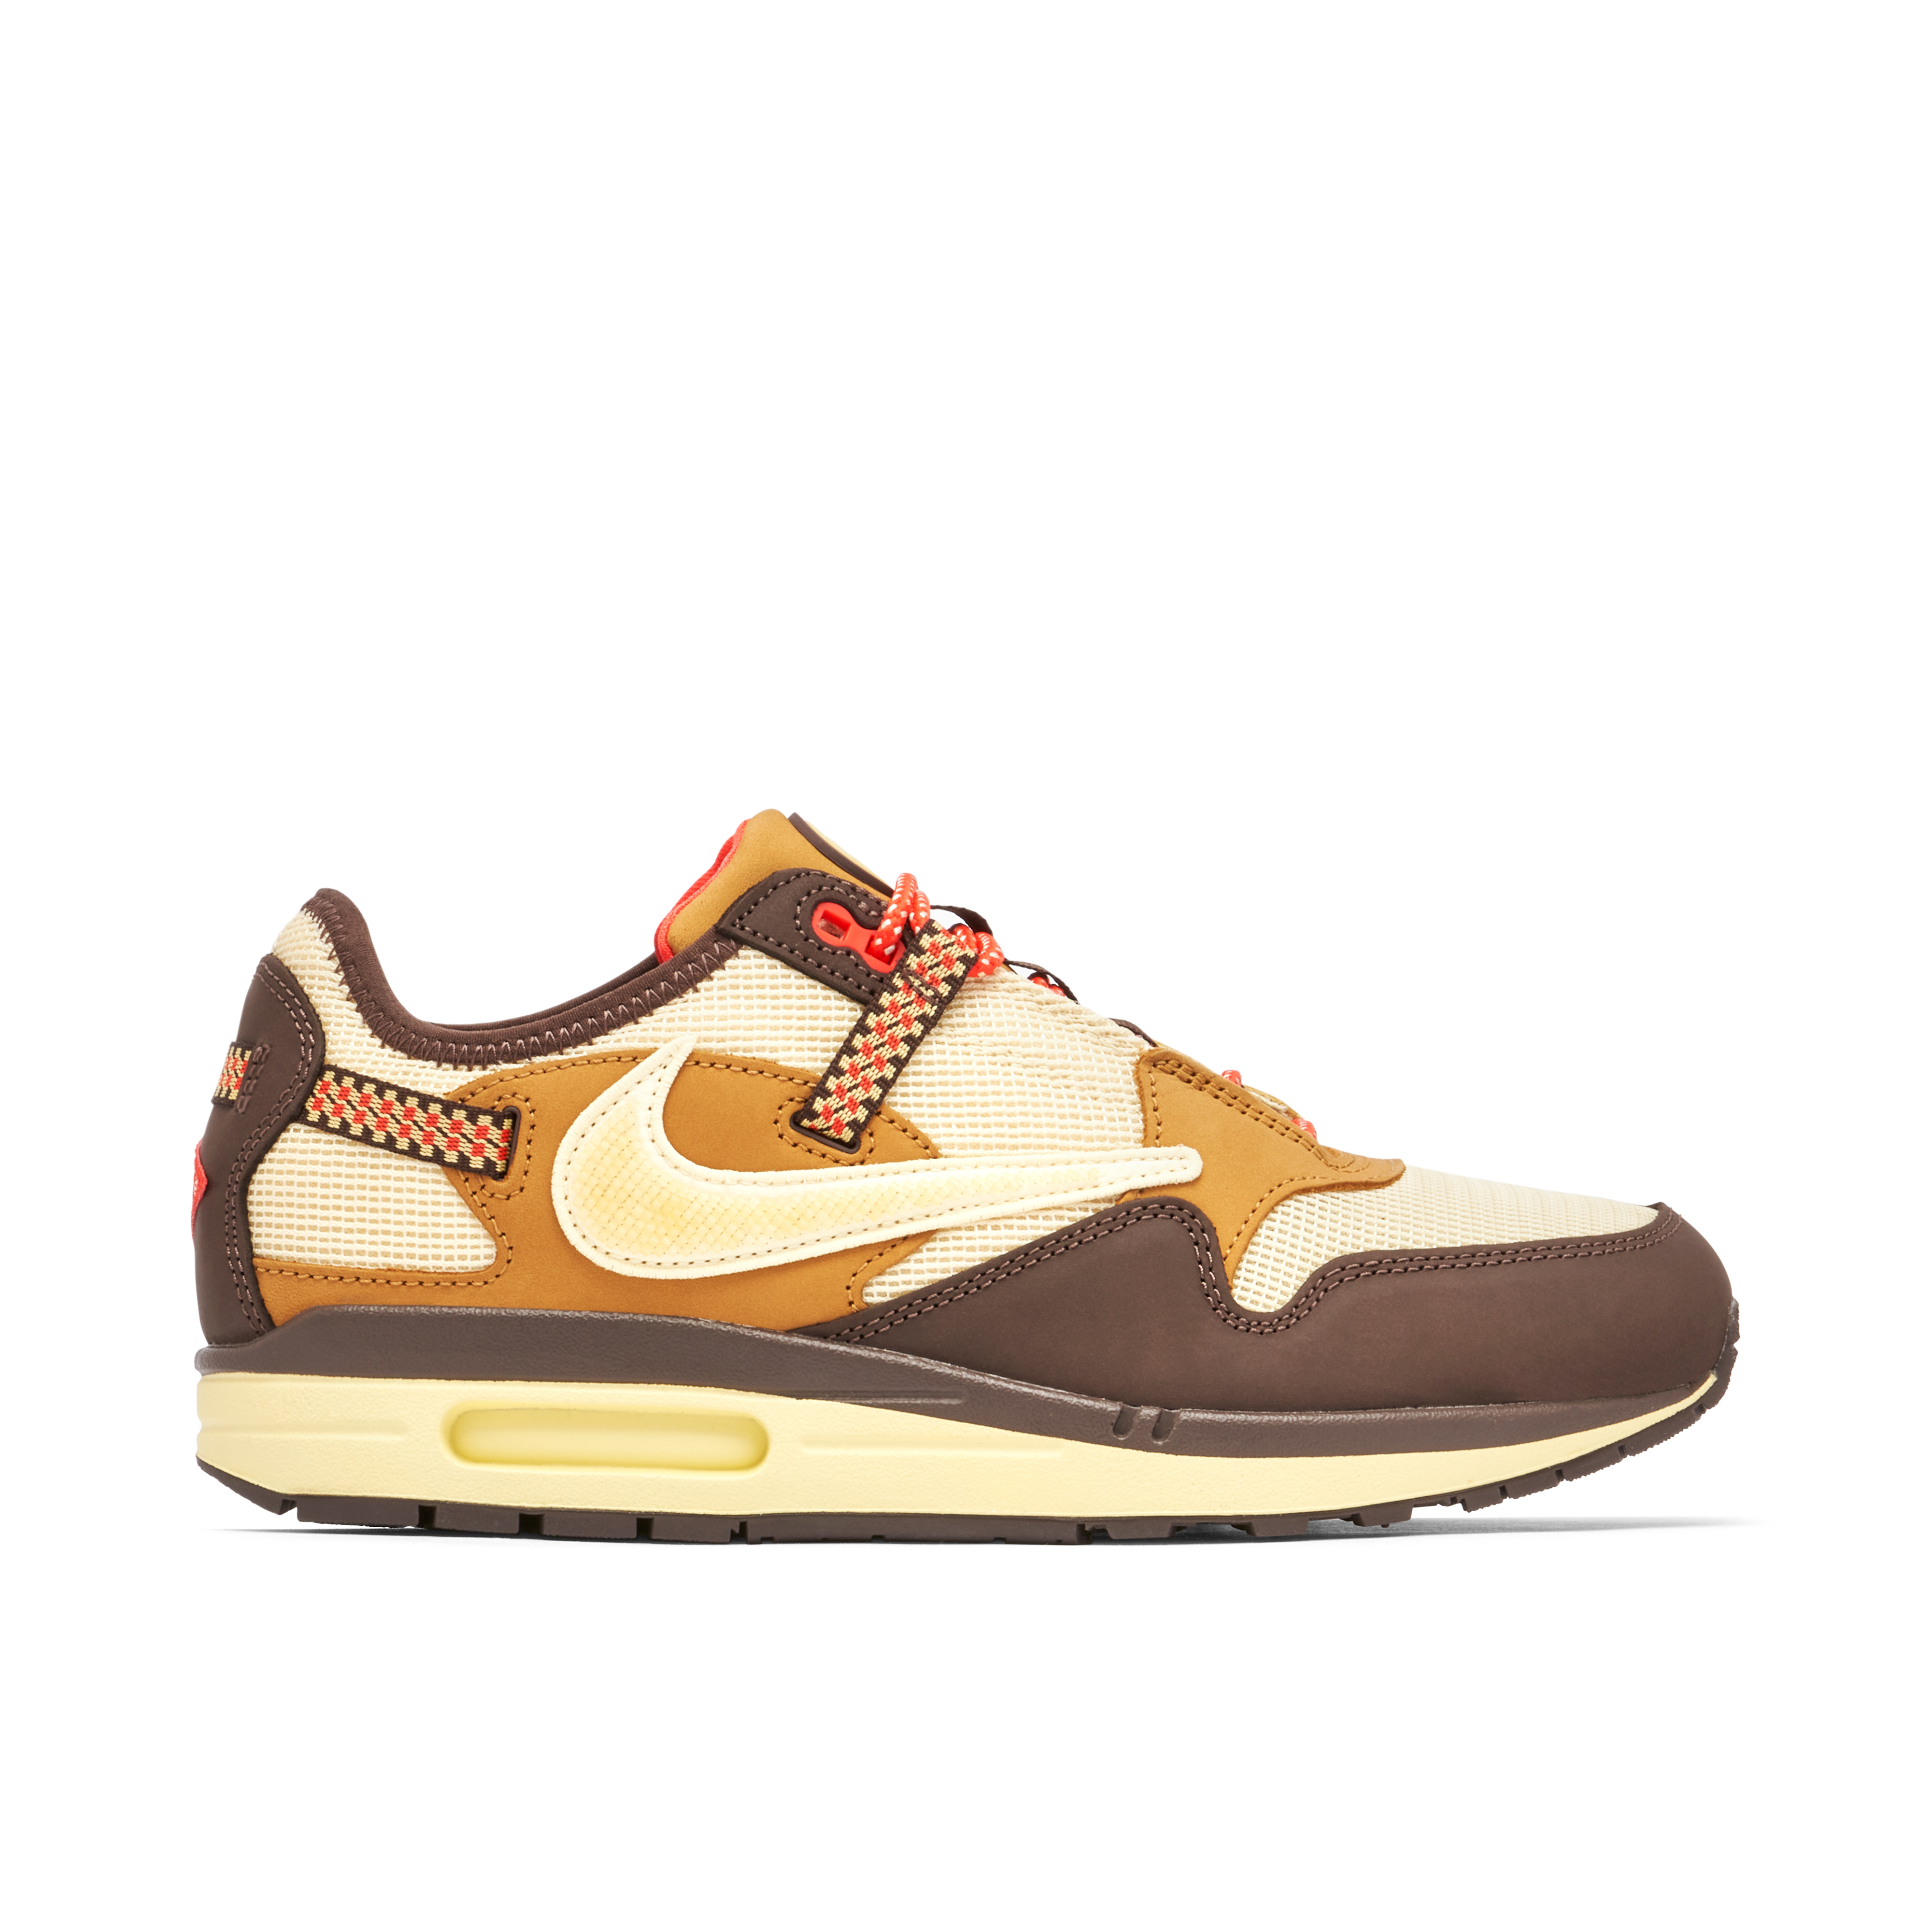 Nike Air Max 1 x Patta Noise Aqua (without Bracelet) | DH1348-004 | Laced